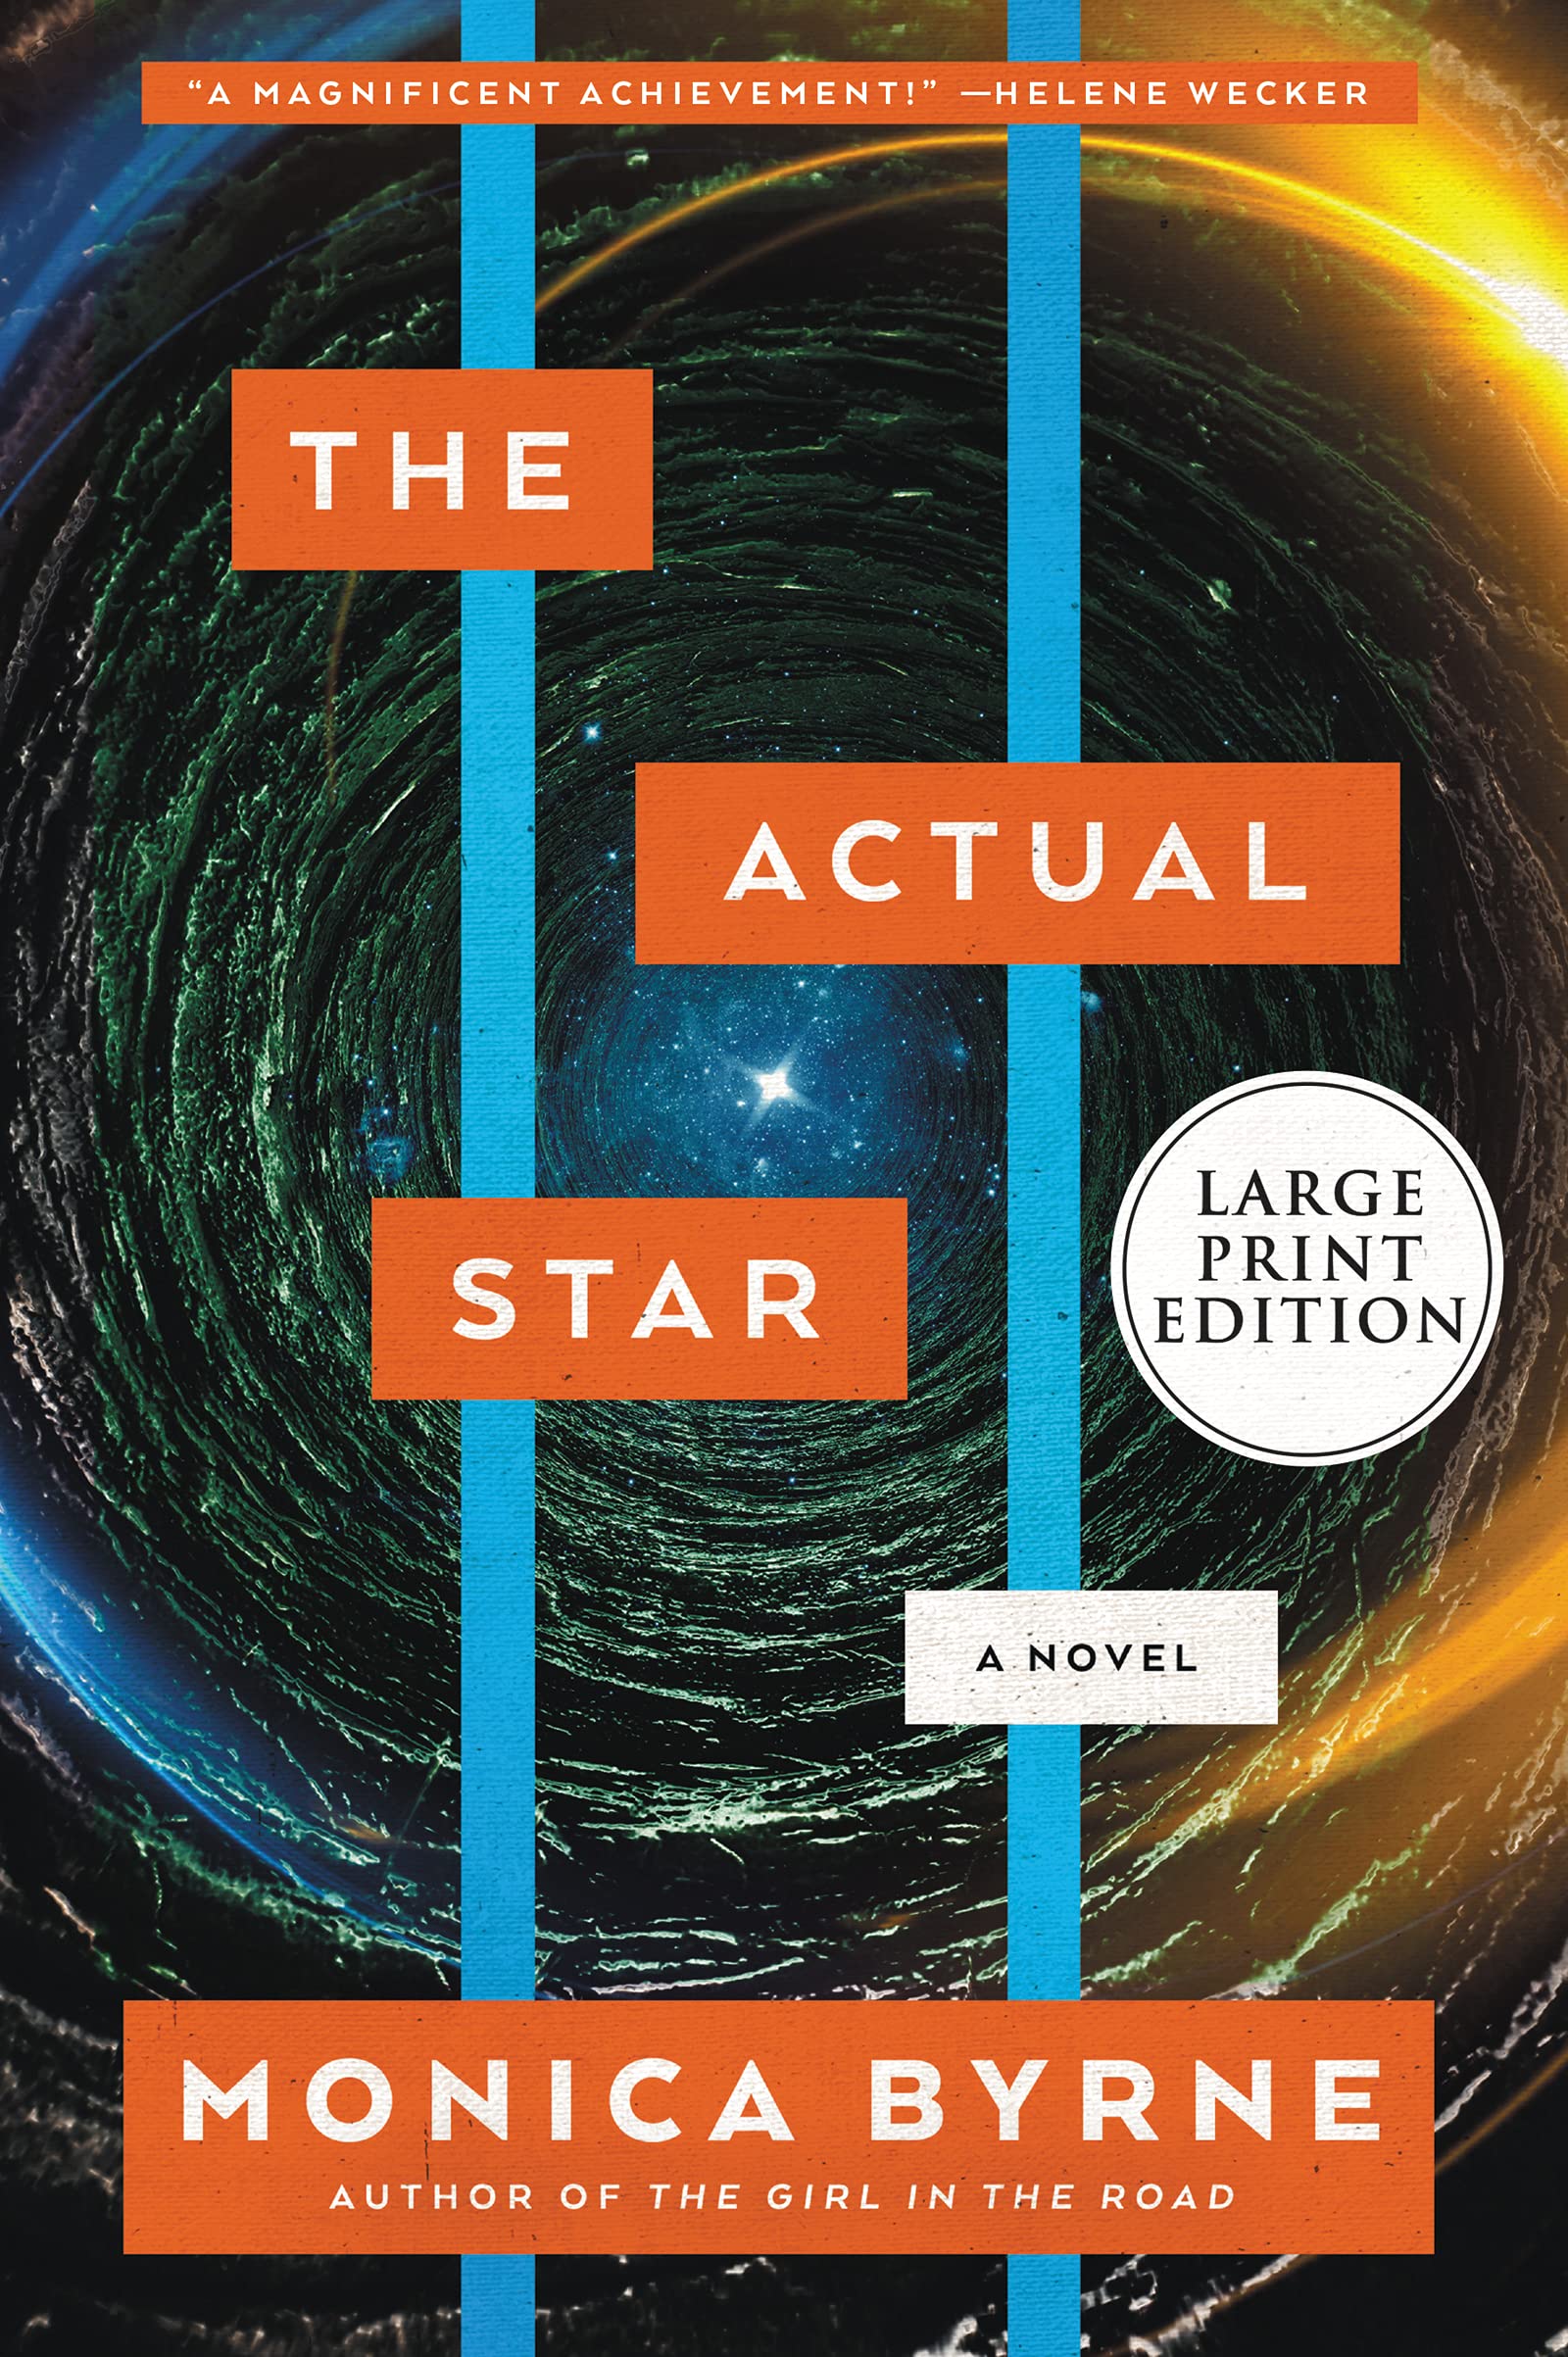 A black and gold swirl centers on a pinpoint of a star. Two blue bands stripe the book vertically, while the text appears in orange horizontal bars.